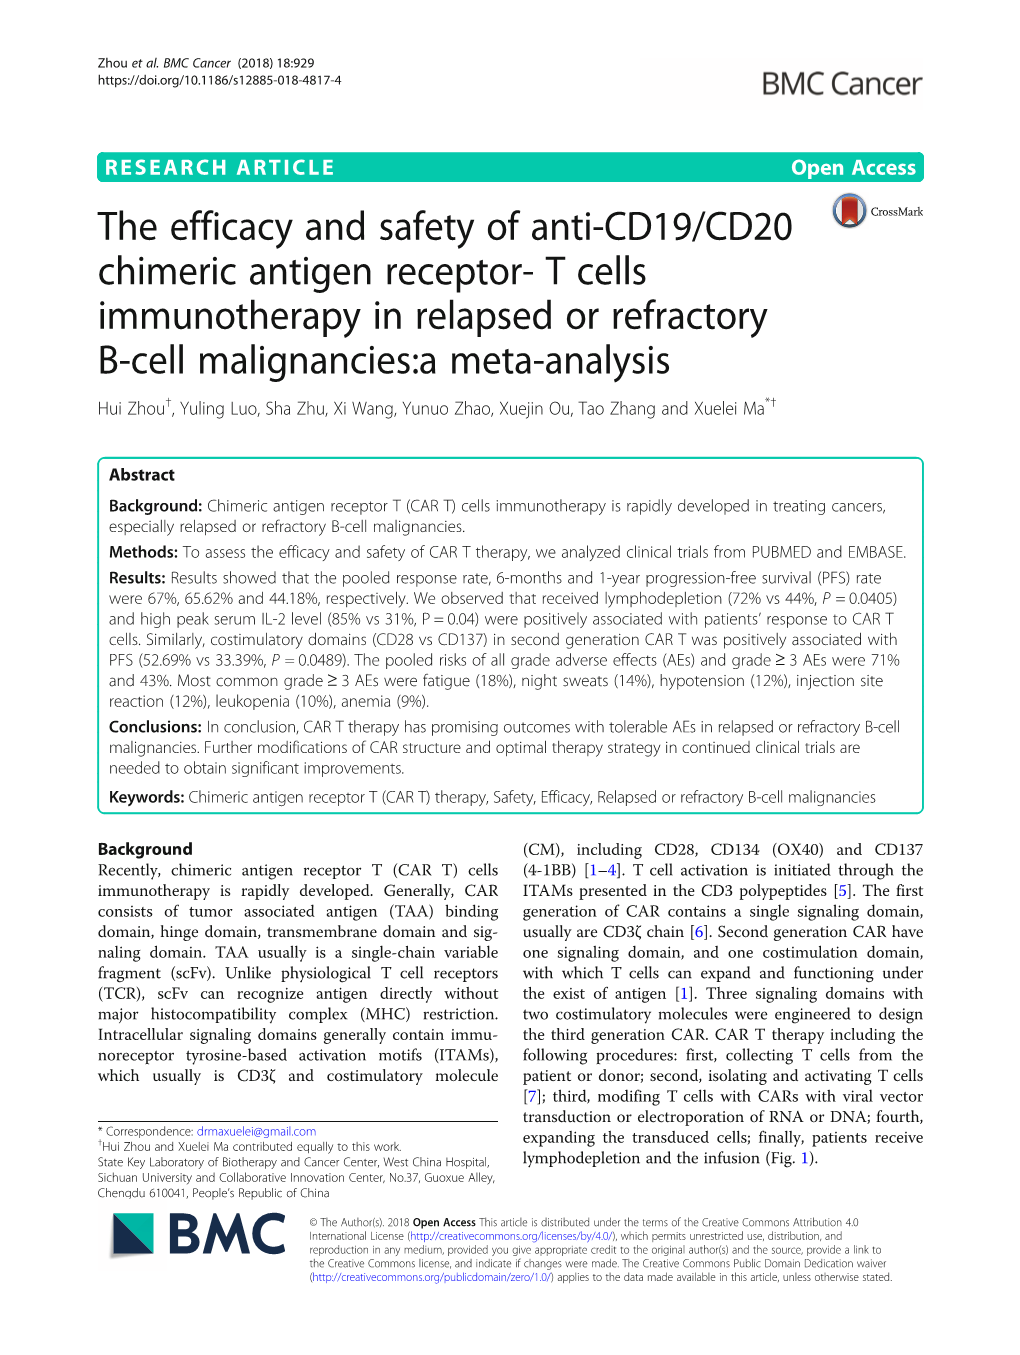 The Efficacy and Safety of Anti-CD19/CD20 Chimeric Antigen Receptor